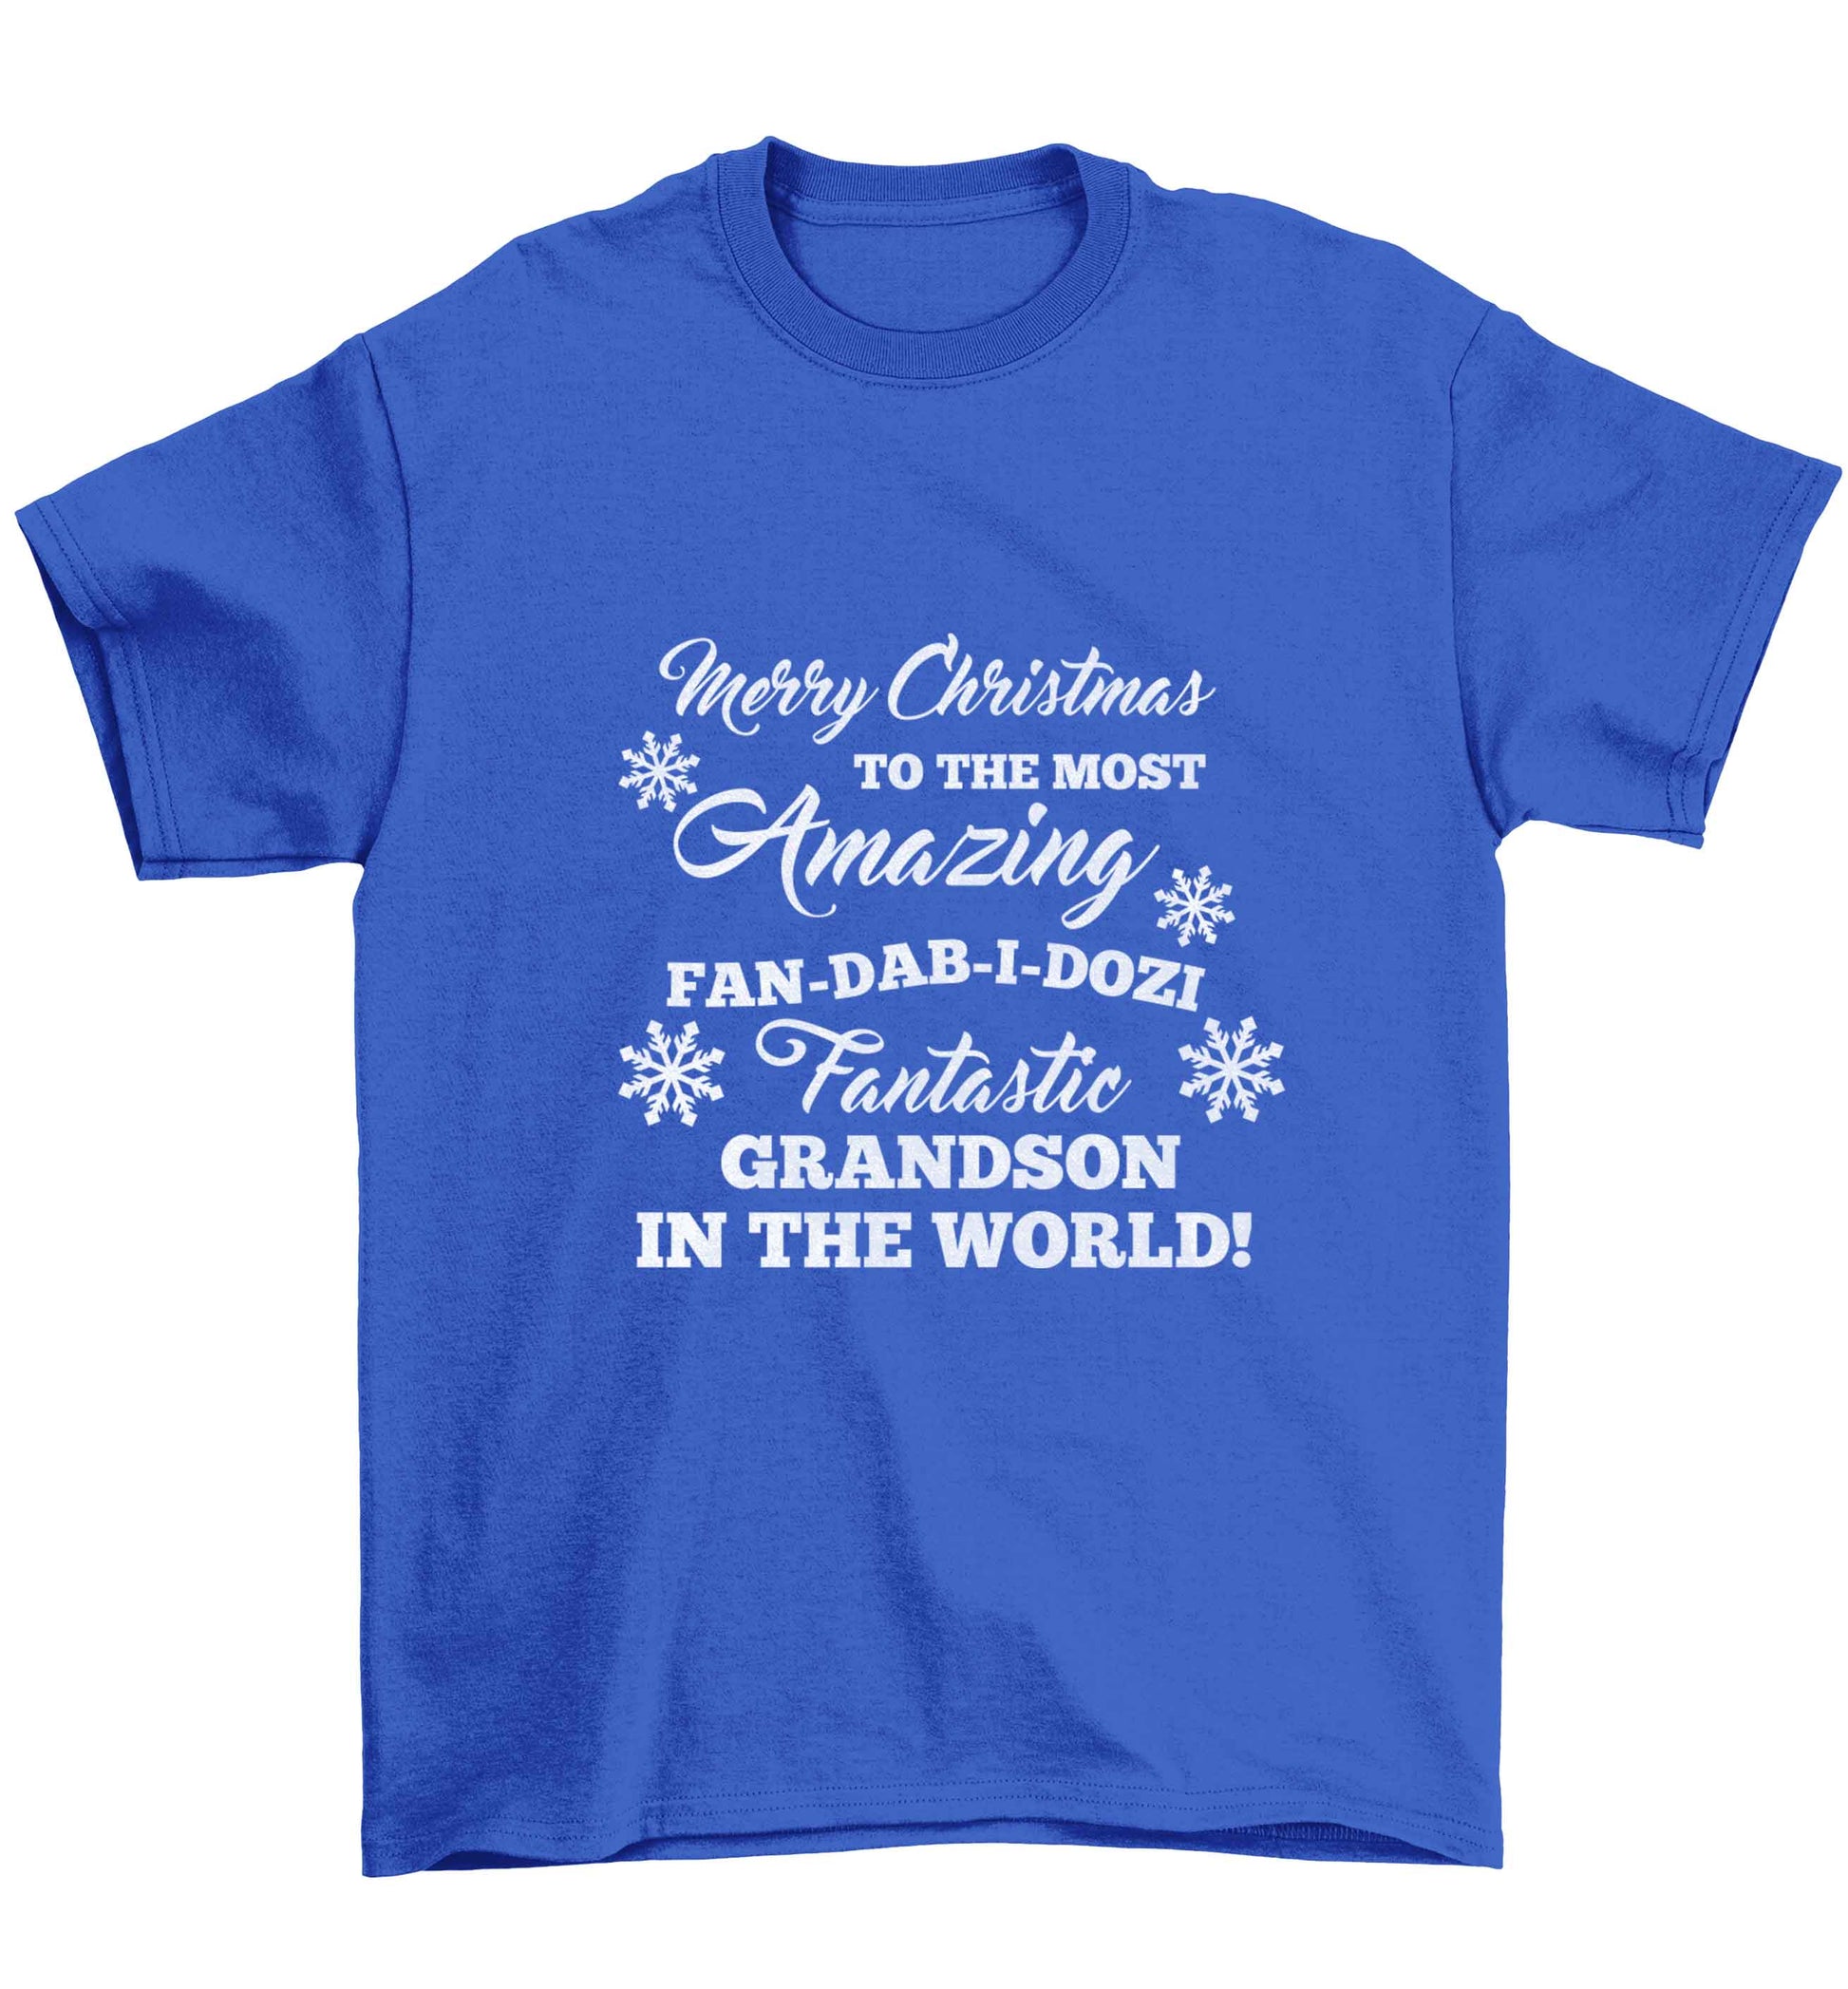 Merry Christmas to the most amazing fan-dab-i-dozi fantasic Grandson in the world Children's blue Tshirt 12-13 Years